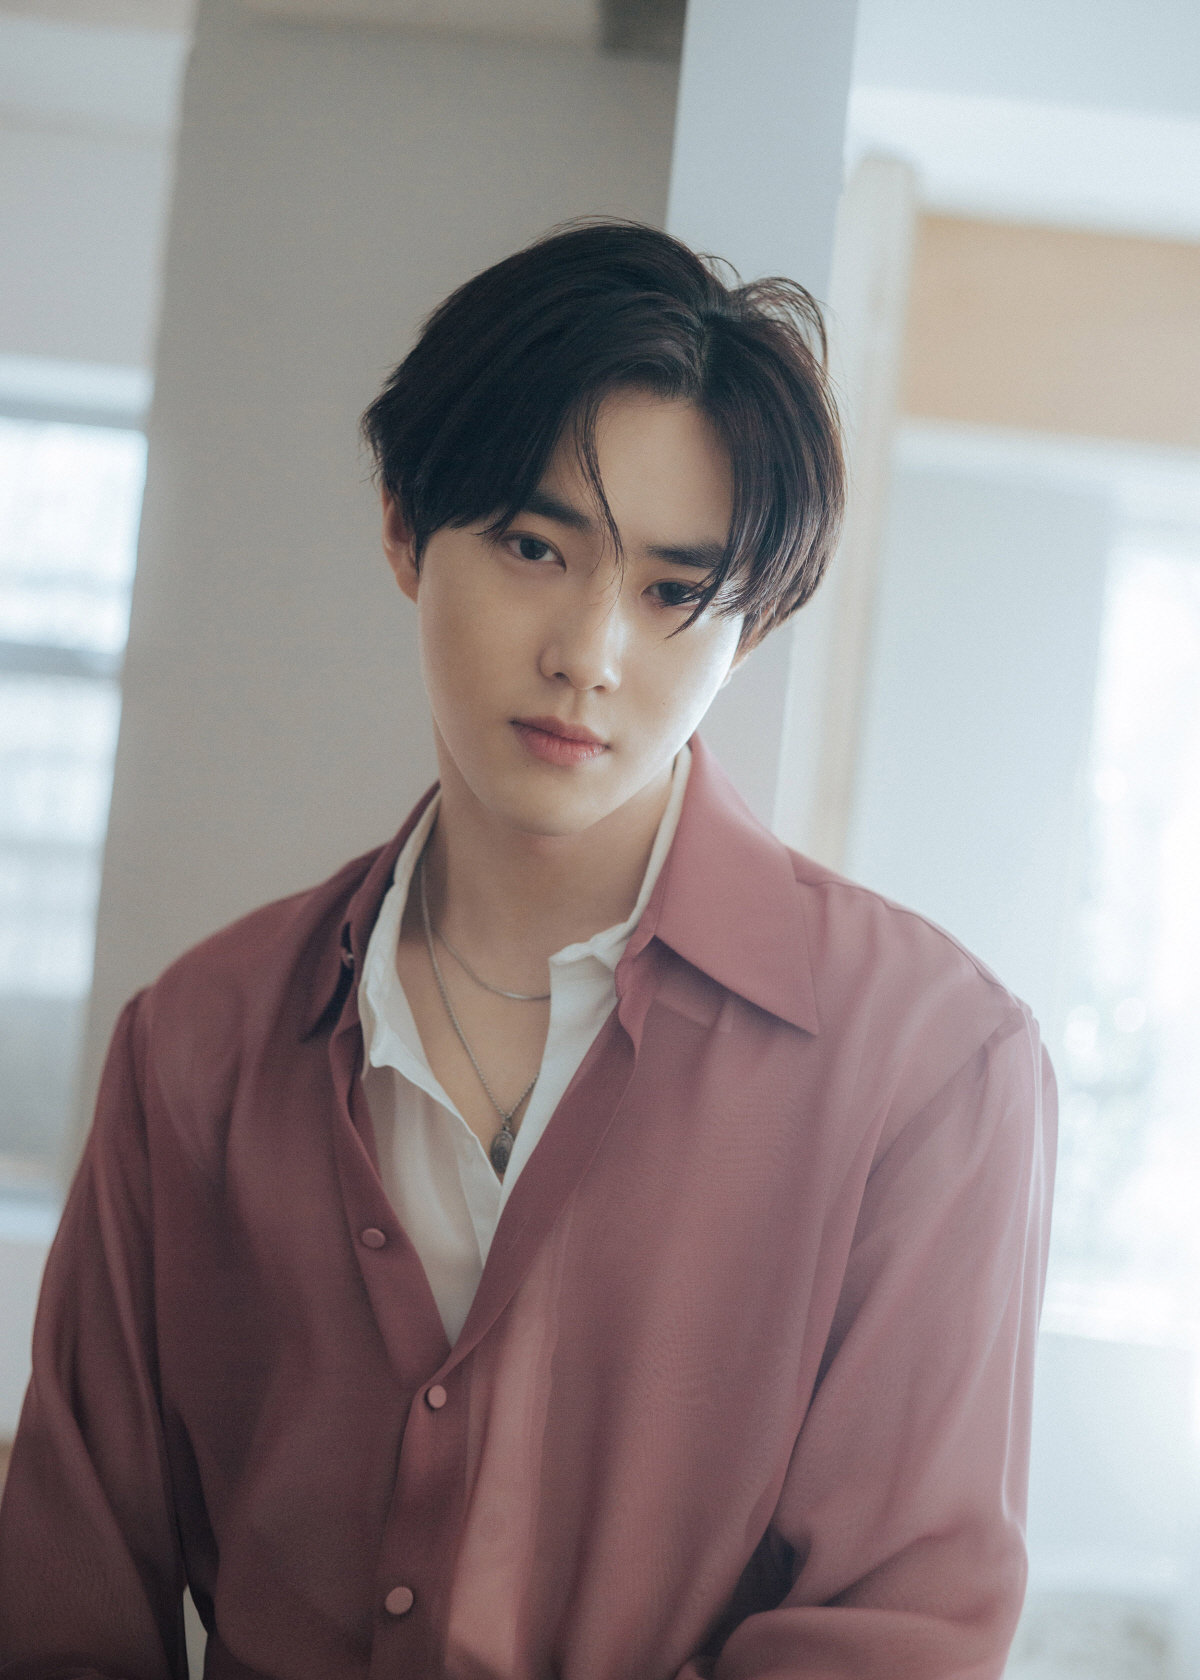 EXO Suho proved its limited global power at the same time as Solo debut.Suhos first mini album, Self-Portrait, released on March 30, is on the iTunes top album charts: France, Finland, Sweden, the United Arab Emirates, Saudi Arabia, India, Argentina, Brazil, Chile, Bahrain, Brunei, Bulgaria, Cambodia, Colombia, Costa Rica, Czech Republic, Dominican Republic, Egypt, Estonia, Greece, Hong Kong, It ranked first in 50 former World regions including Indonesia, Israel, Japan, Jordan, Kazakhstan, Taiwan, Laos, Malaysia, Mexico, Mongolia, New Zealand, Nigeria, Bolivia, Norway, Oman, Panama, Peru, Philippines, Poland, Qatar, Romania, Russia, Belarus, Singapore, Sri Lanka, Thailand, Turkey, Ukraine and Vietnam.In addition, this album ranked first in various music charts such as Hanter chart, Shinnara record, Kyobo Bookstore, Yes24, Aladdin, as well as the digital album sales chart in Chinas largest music site QQ music, Cougu Music and Couture Music. The title song Love, Haja (Lets Love) It confirmed Suhos explosive popularity by climbing to the top of the major music charts such as the PILL.Suhos first mini album, Self-Portrait, includes the title song Love, Lets Love in the modern rock genre, as well as O2 (Otu), Made In You (Made in You), Starry Night, Self-Portrait,  A total of six songs in a lyrical atmosphere, including Your Turn (For You Now), are being received and received a good response.Meanwhile, Suho will appear on MBC FM4Us This is Kim Shin-young, the Hope Song of noon, which airs today (31st) at 12 p.m.